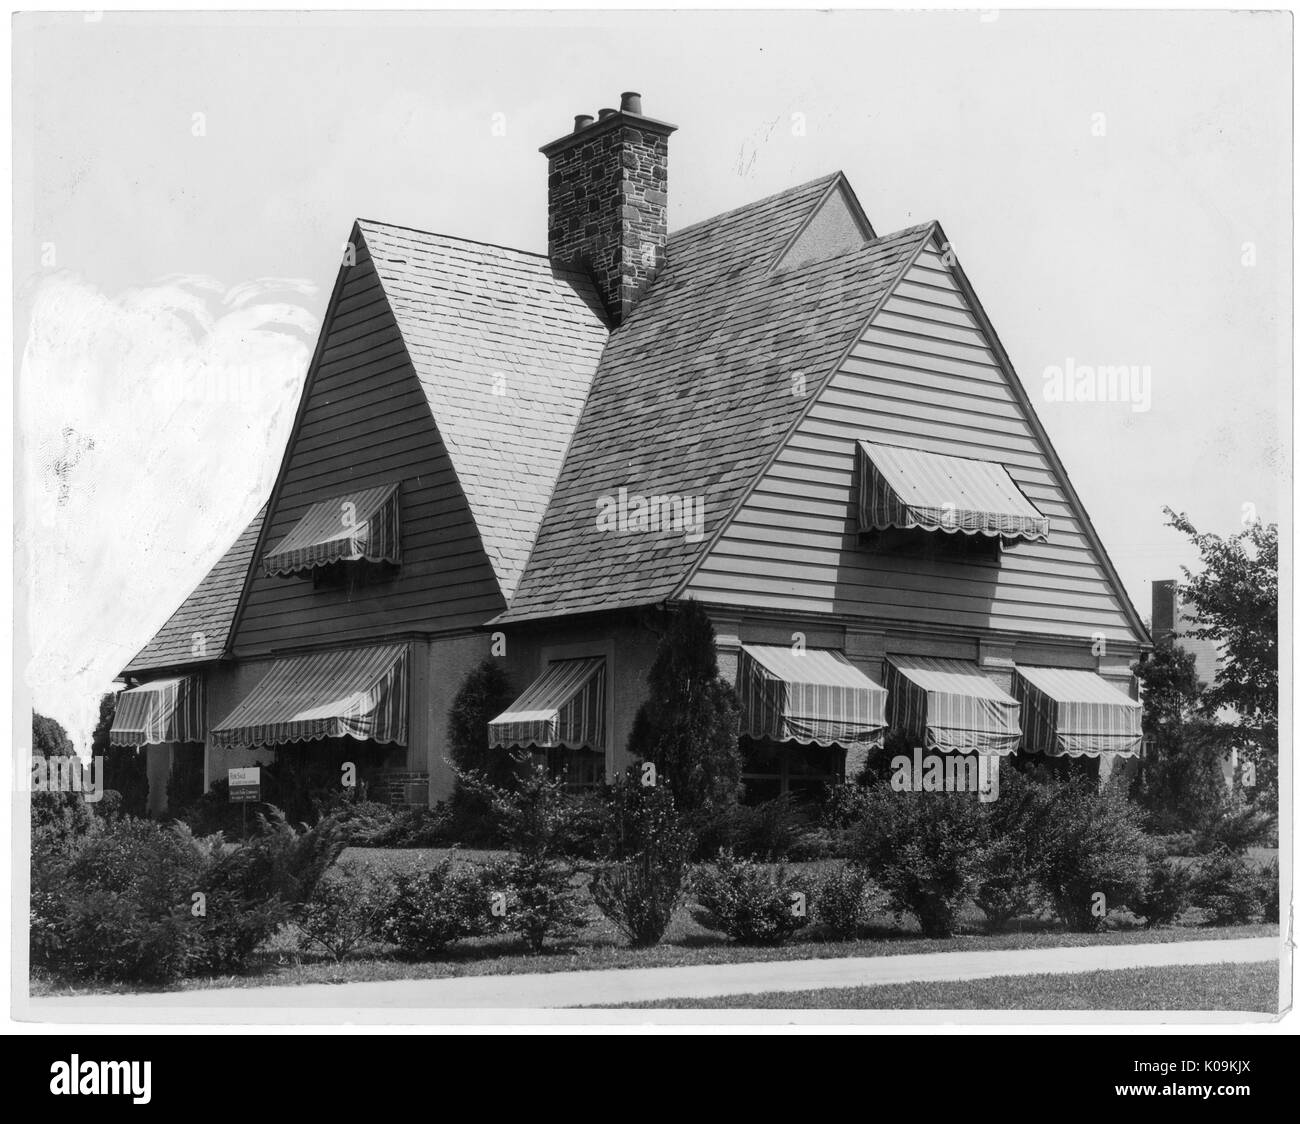 Landscape shot of a stylized two-story house with large, steep triangular roof structures, with window hoods of striped pattern on every window, surrounded by shrubbery arranged in a line, Roland Park/Guilford, Baltimore, Maryland, 1910. This image is from a series documenting the construction and sale of homes in the Roland Park/Guilford neighborhood of Baltimore, a streetcar suburb and one of the first planned communities in the United States. The neighborhood was segregated, and is considered an early example of the enforcement of racial segregation through the use of restricted covenants. Stock Photo